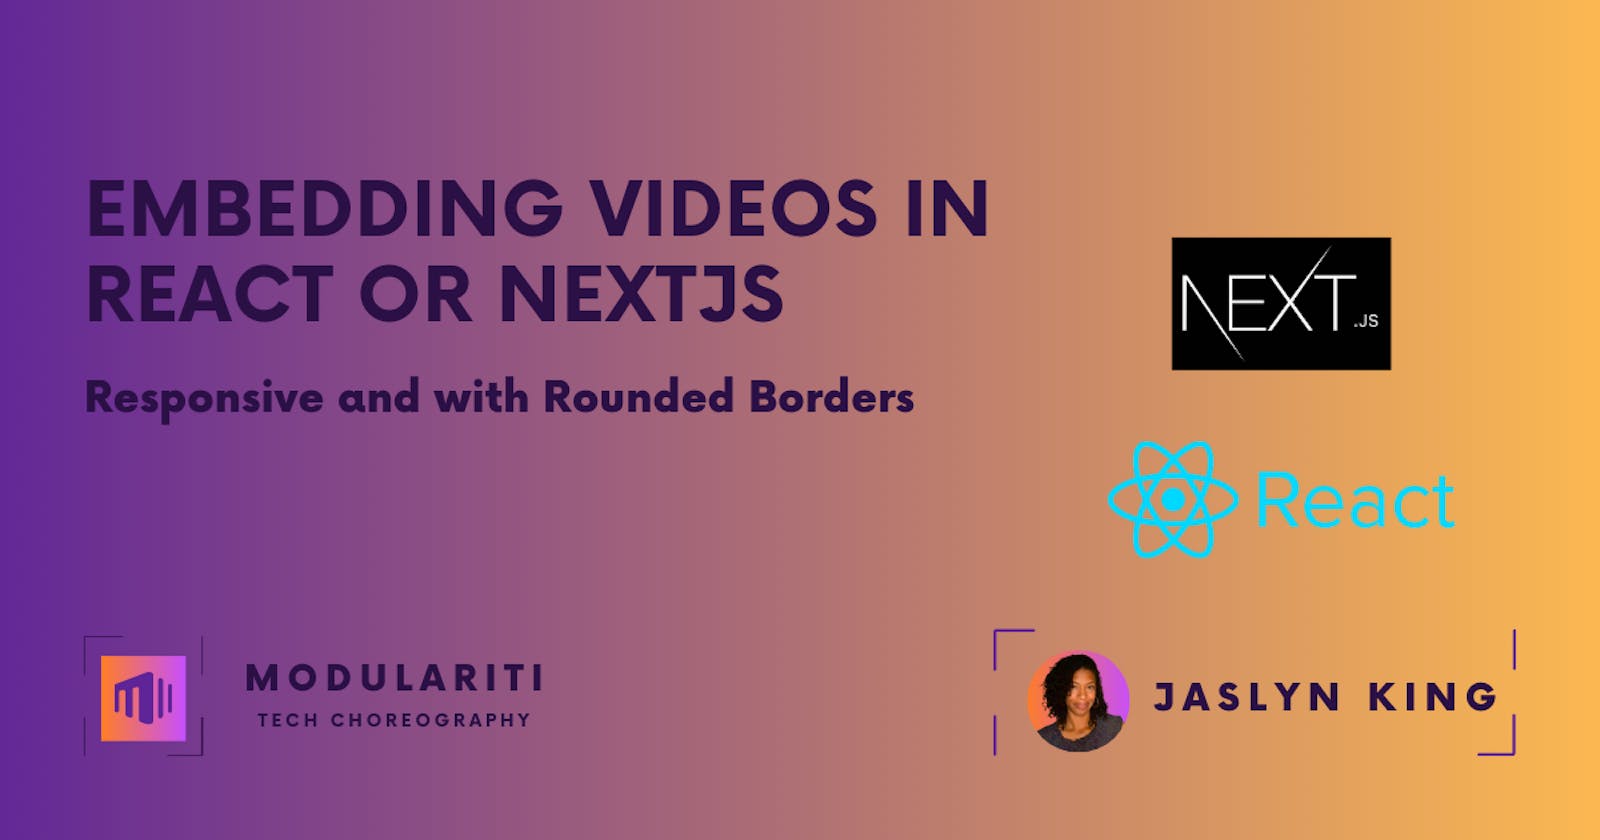 Embedding Videos in React or Nextjs that are Responsive and have a Rounded Border Radius